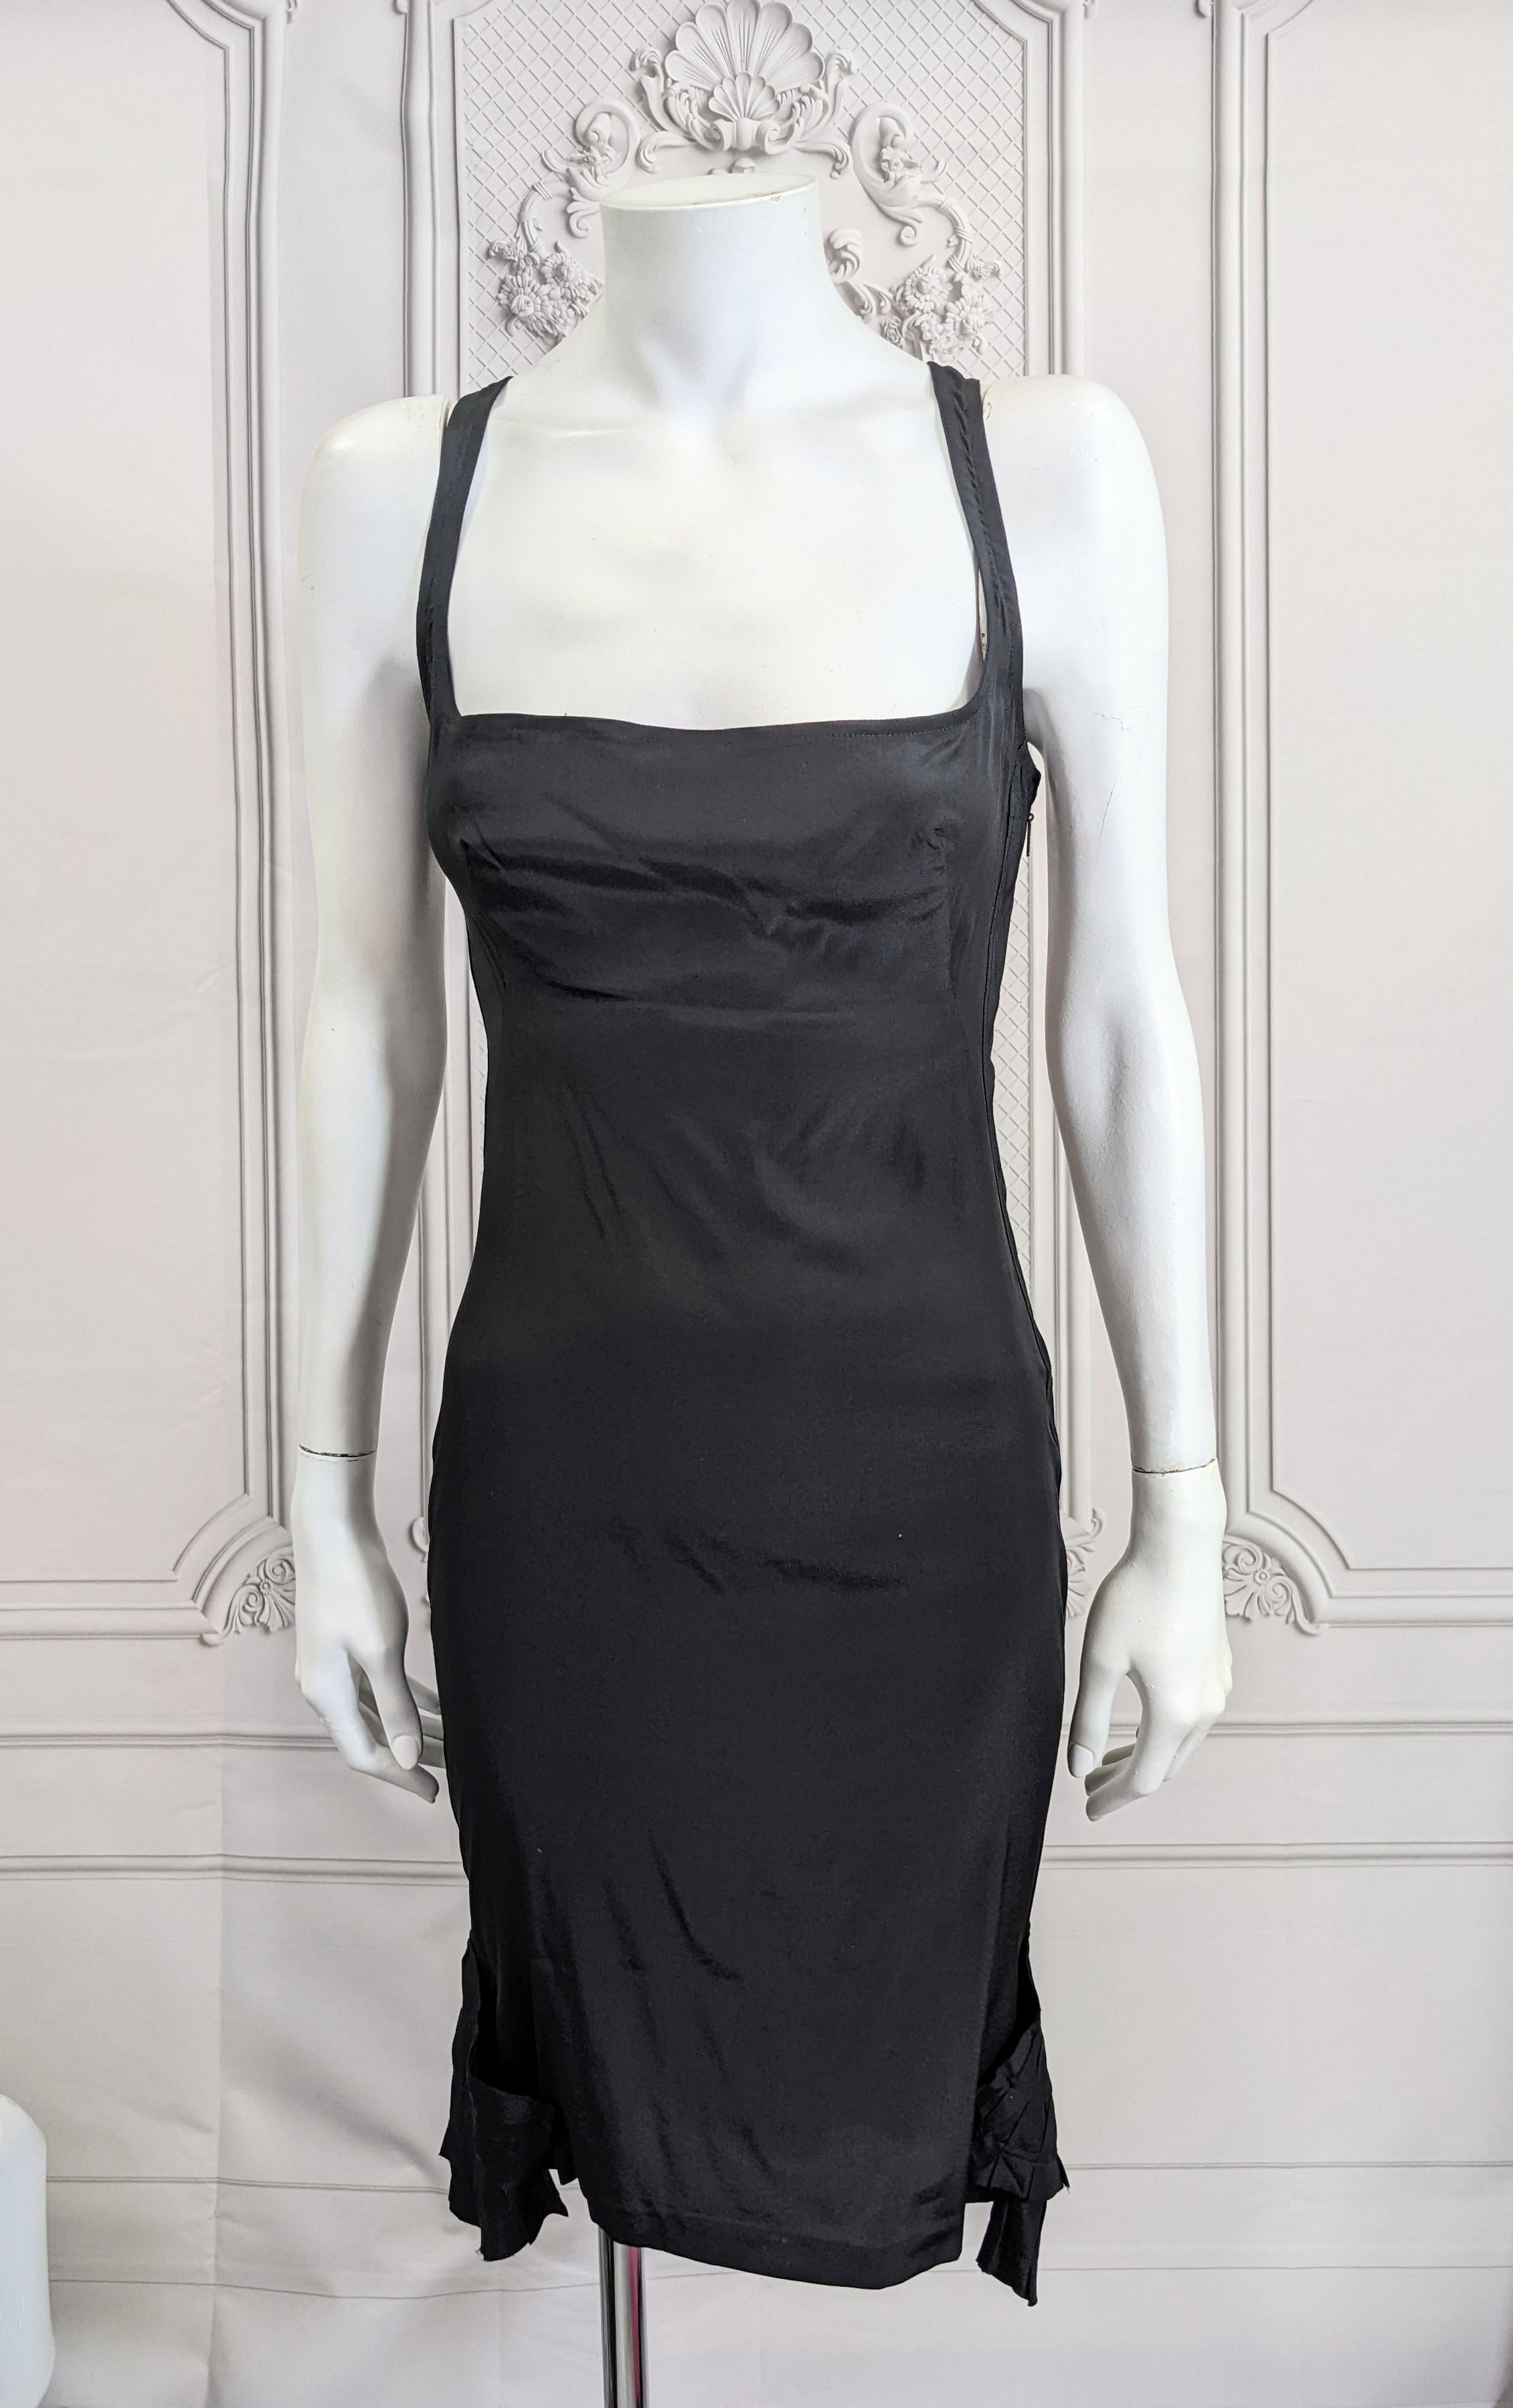 Gucci by Tom Ford Body Con Slip dress in black silk crepe with pleated fan hem. Very provocative unlined dress designed to sizzle. Simple racer back styling with a flourish a fan pleated motifs at the hem for added interest and movement. The side